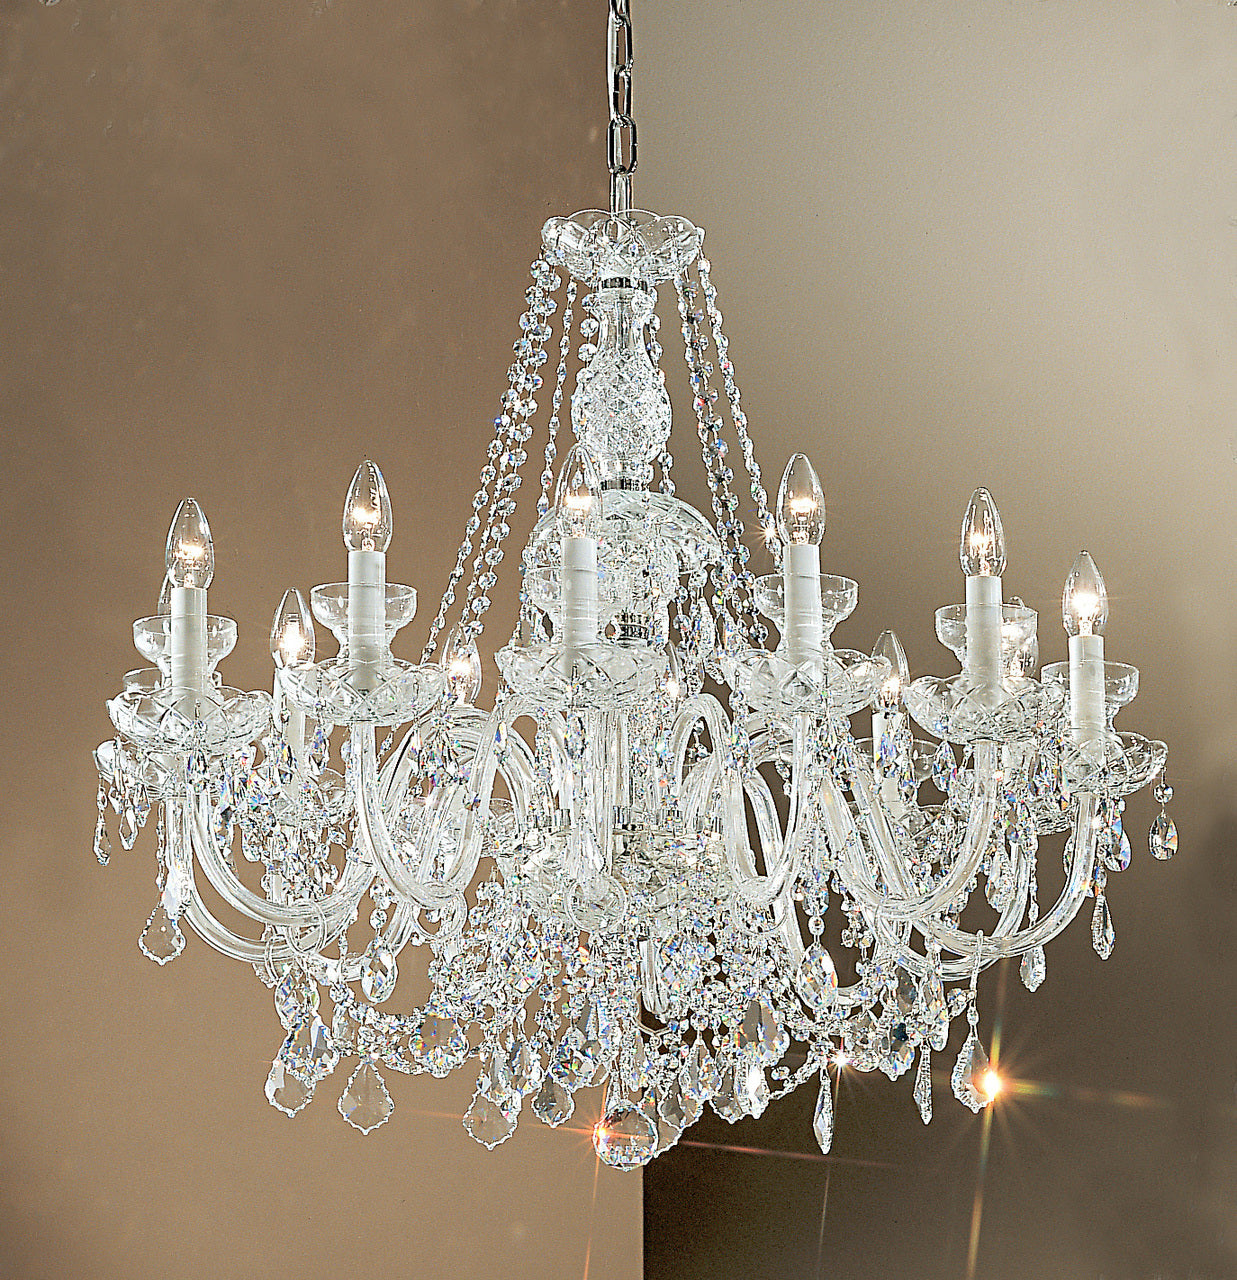 Classic Lighting 8274 G SC Bohemia Crystal/Glass Chandelier in 24k Gold (Imported from Italy)